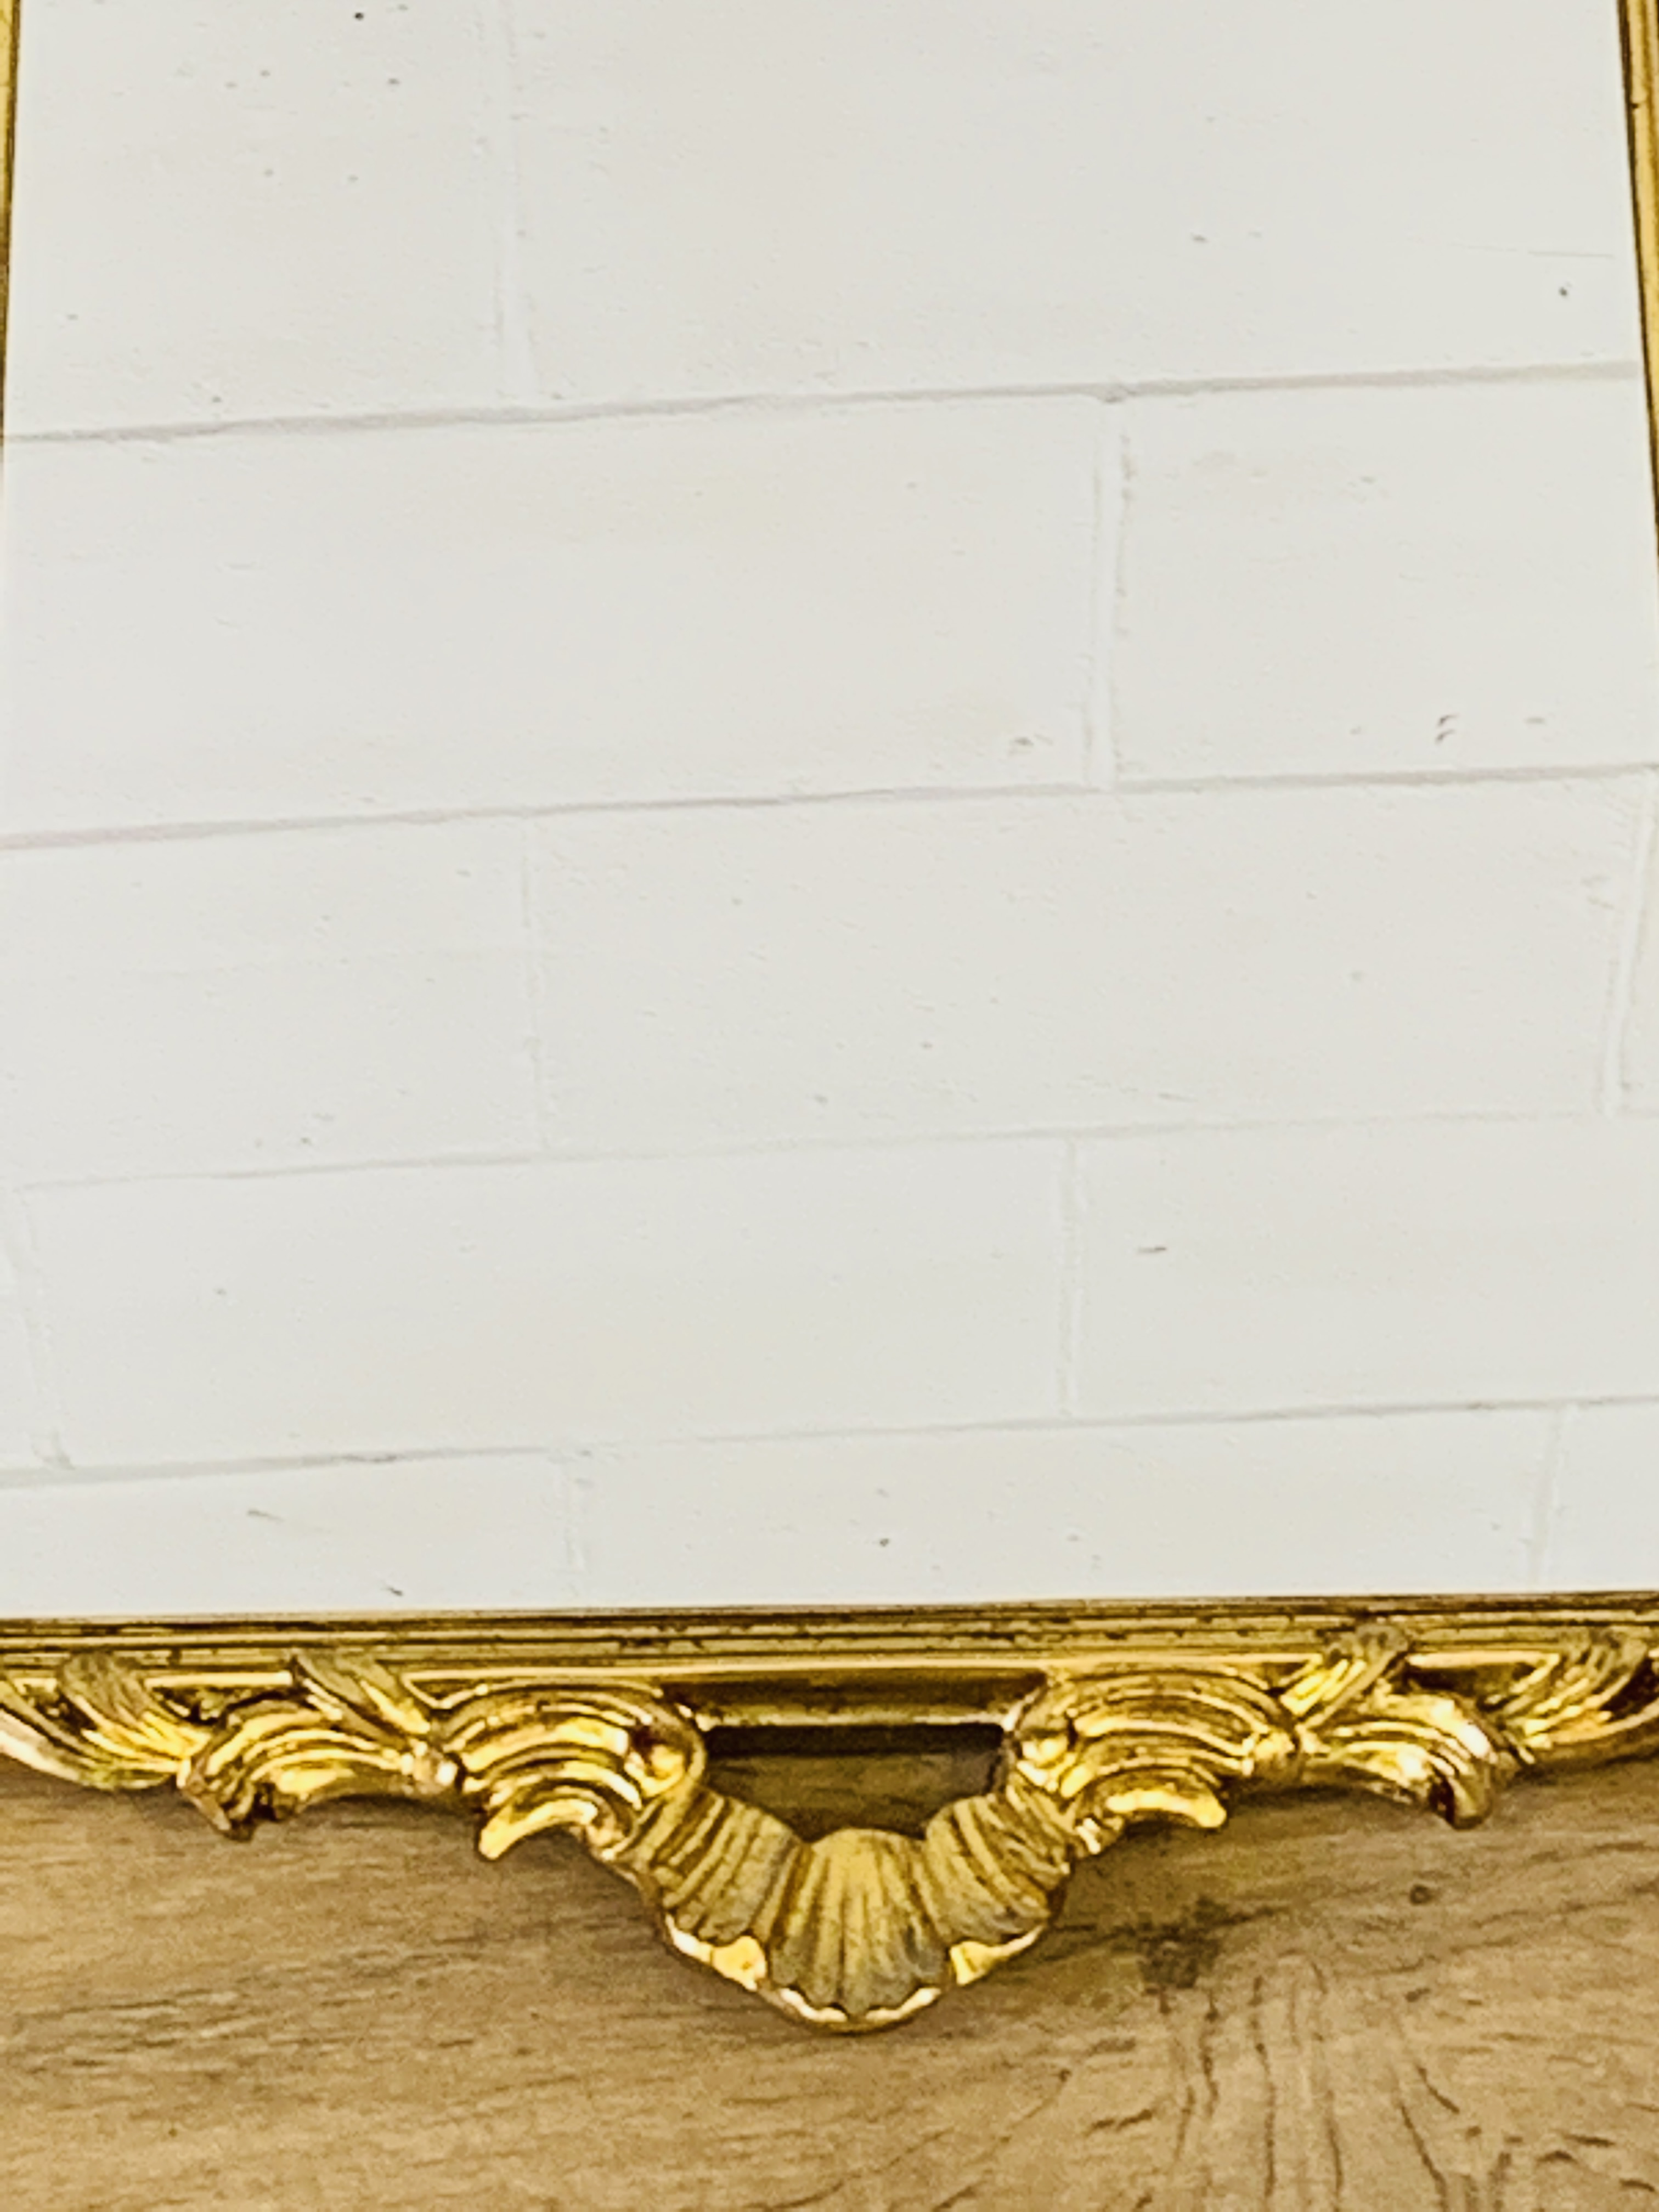 Giltwood mirror - Image 2 of 4